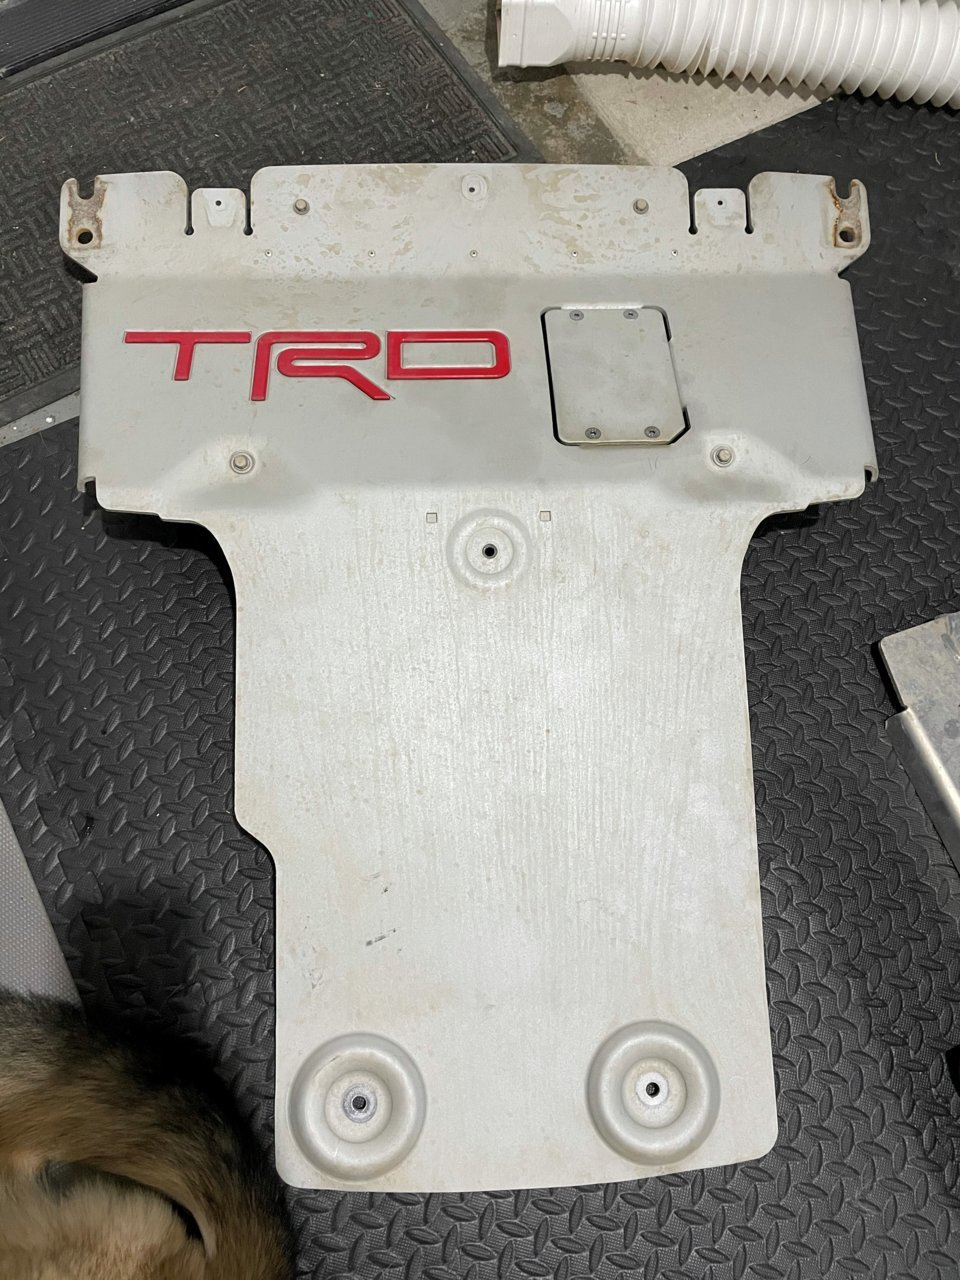 SOLD: 2021 TRD Pro Skid Plate w/ all hardware $300 | Toyota Tundra Forum